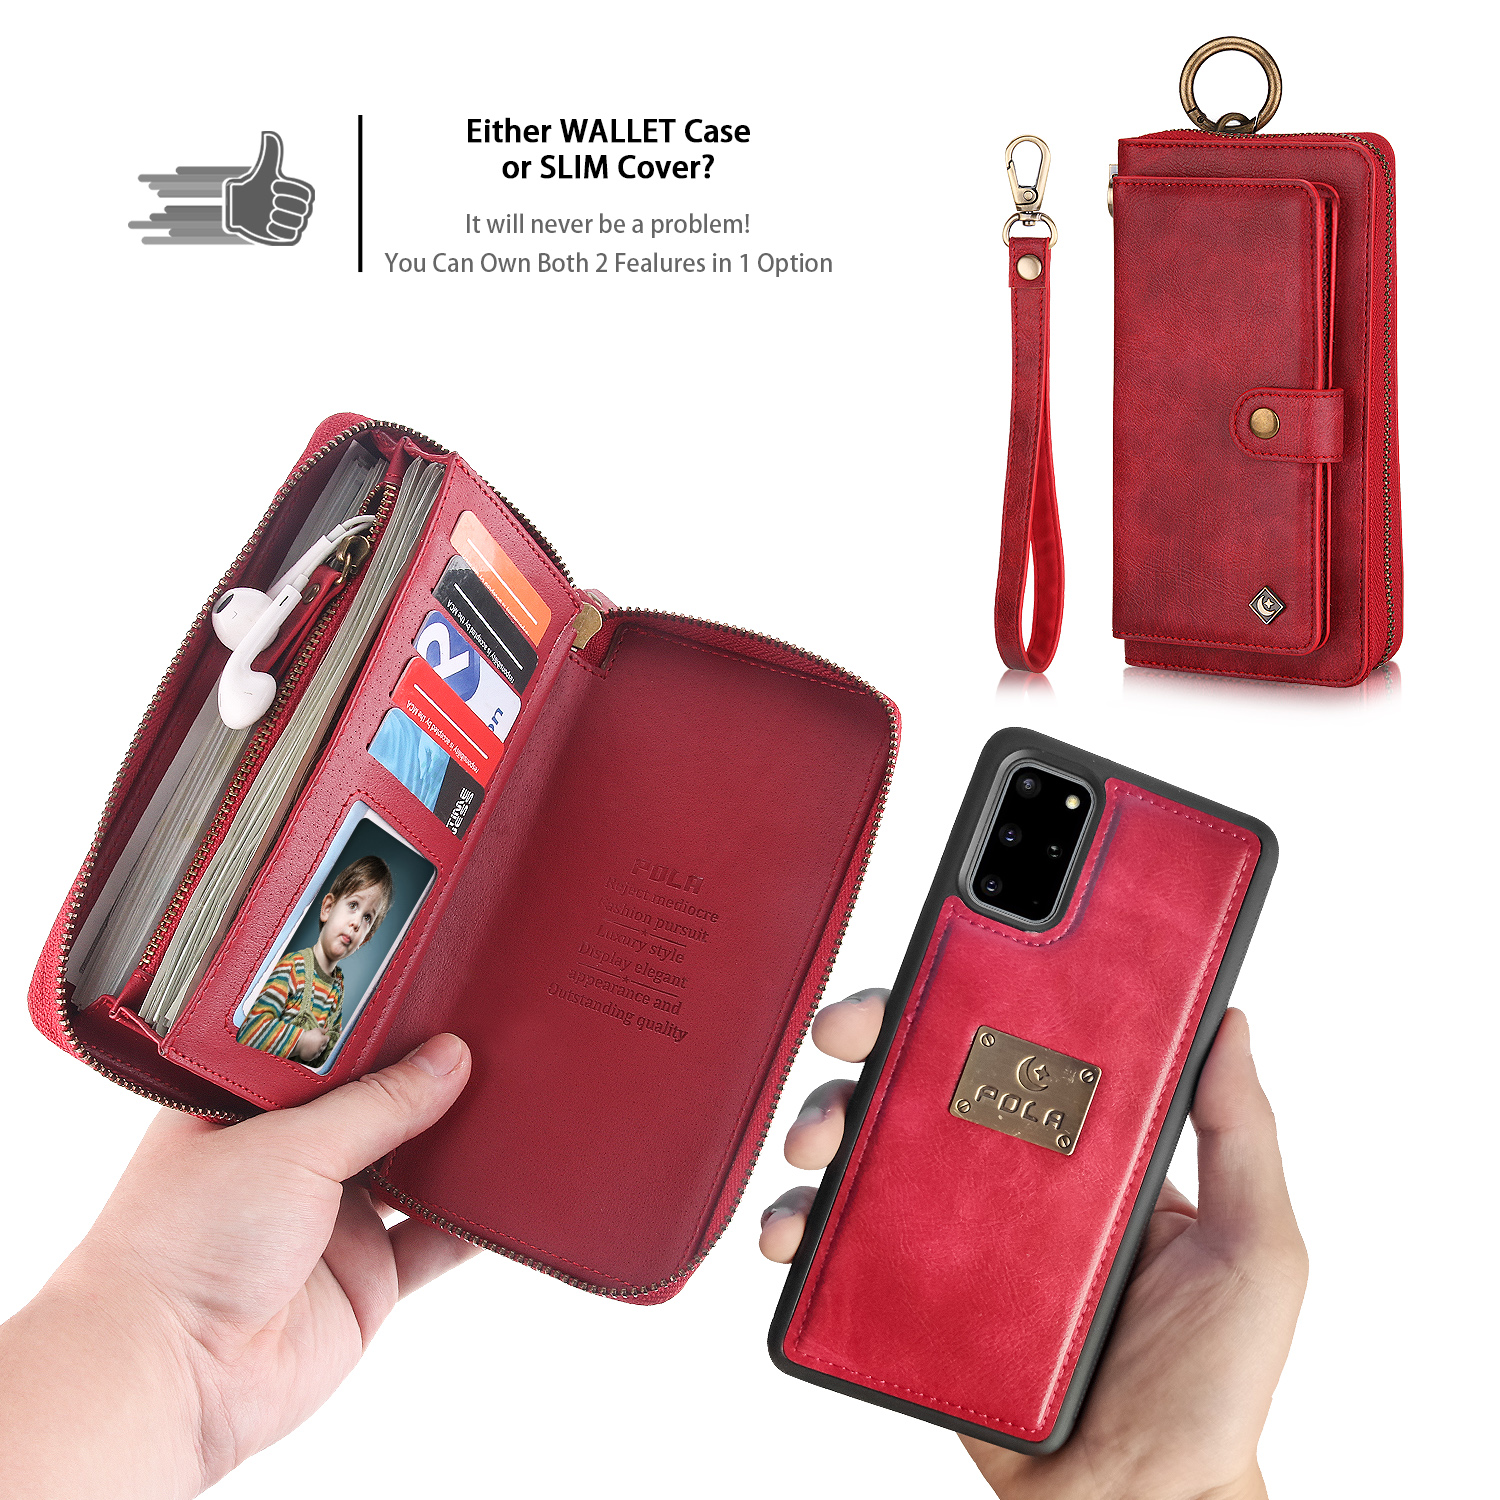 Galaxy S20+ Plus Case, Allytech Retro PU Leather Magnetic Detachable Back Cover Zipper Wallet Folio Multiple Cards Slots Purse Wrist Strap Clutch Protective Case for Samsung Galaxy S20 Plus,Red - image 5 of 9